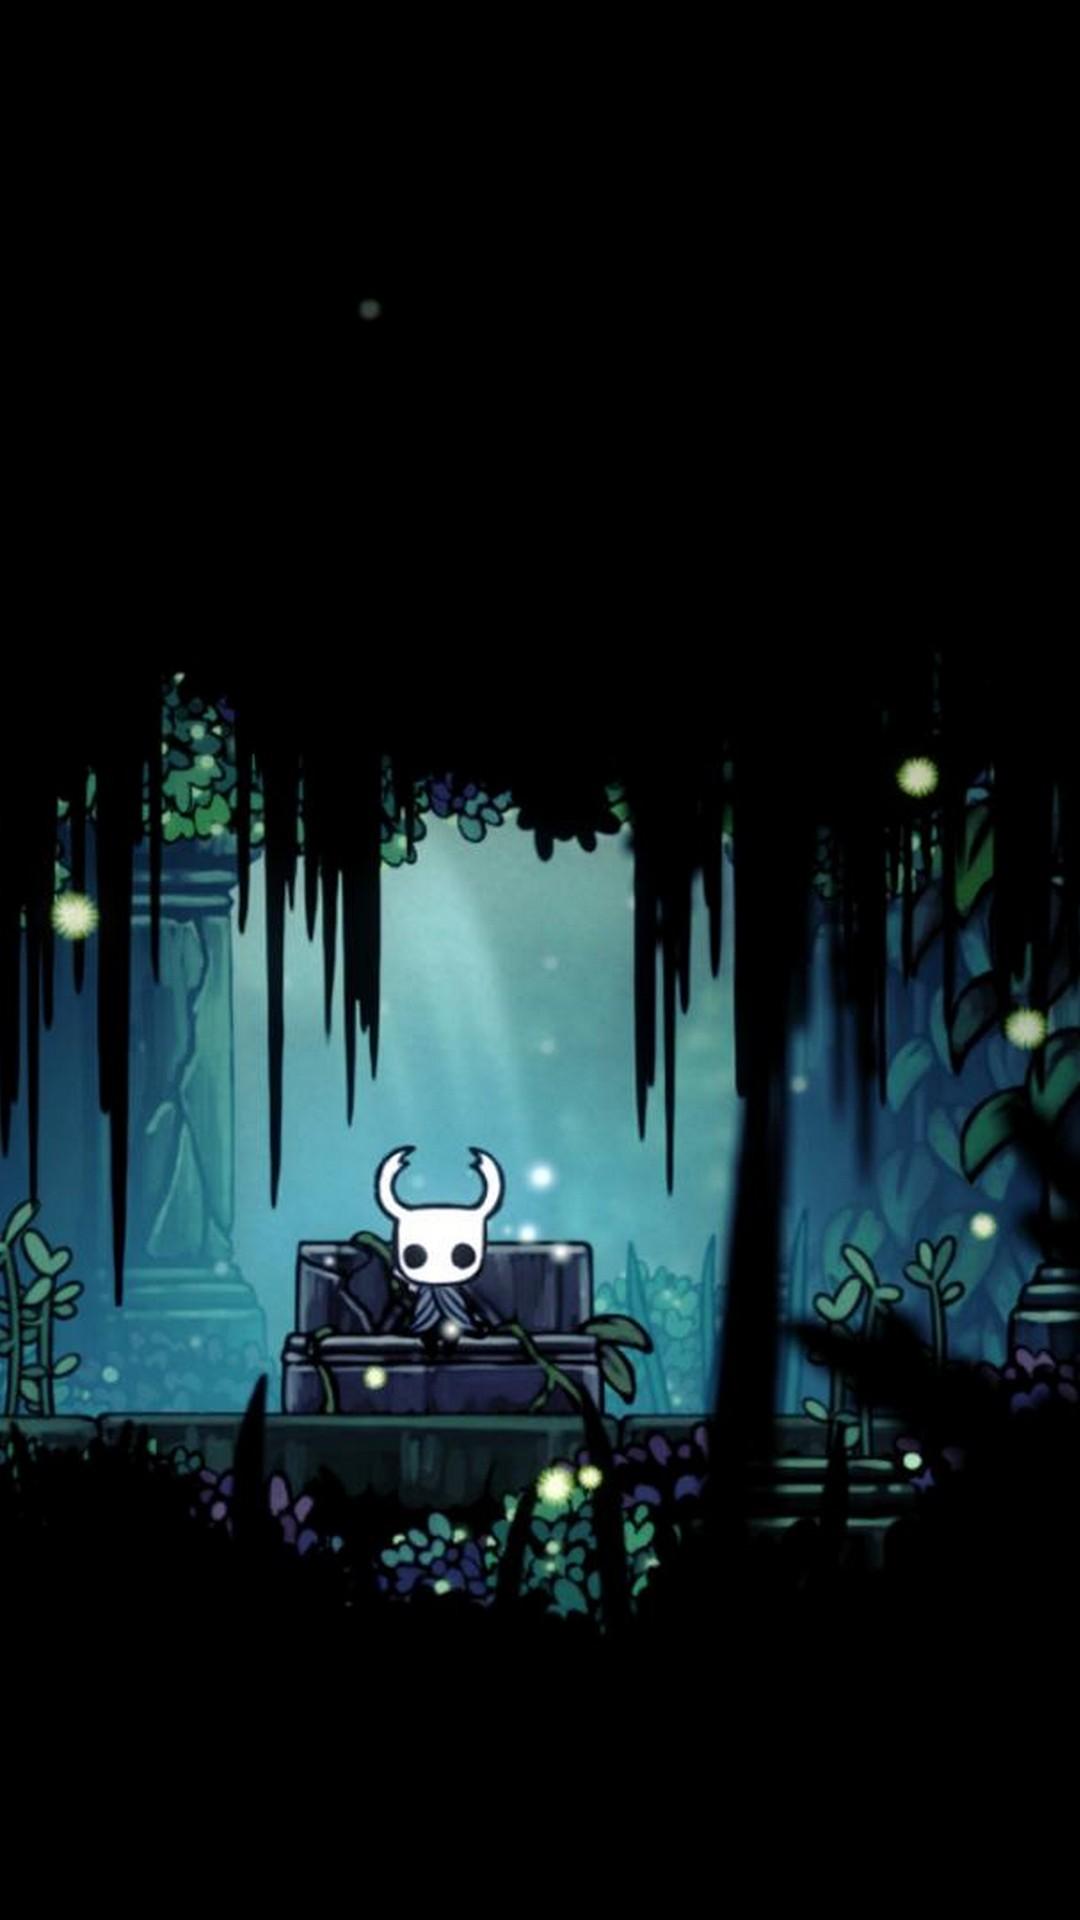 1080 x 1920 · jpeg - Android Wallpaper HD Hollow Knight - 2021 Android Wallpapers